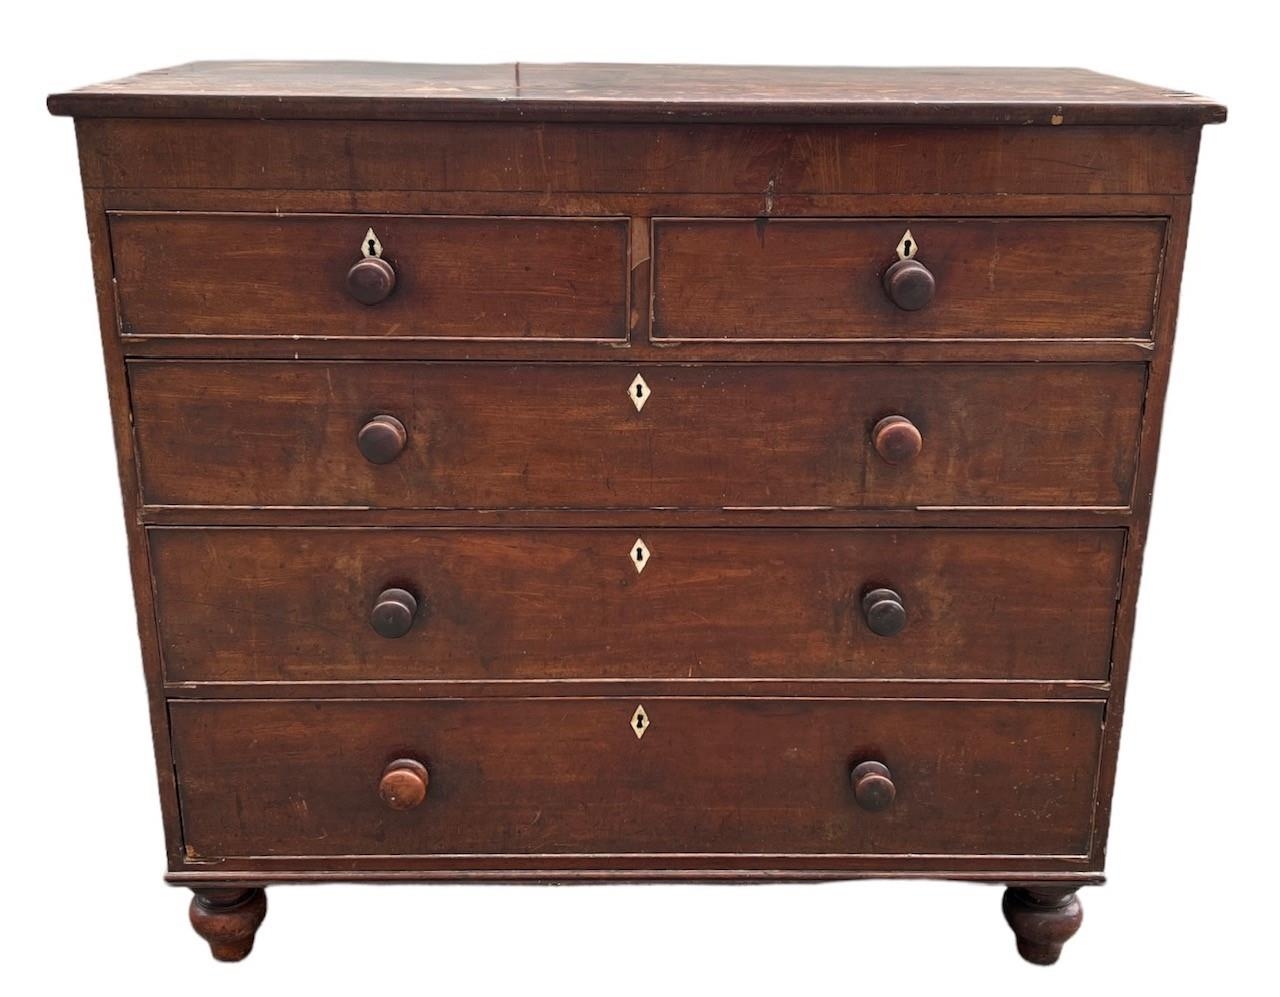 A 19TH CENTURY REGENCY PERIOD MAHOGANY CHEST Of two short above three long graduated drawers, fitted